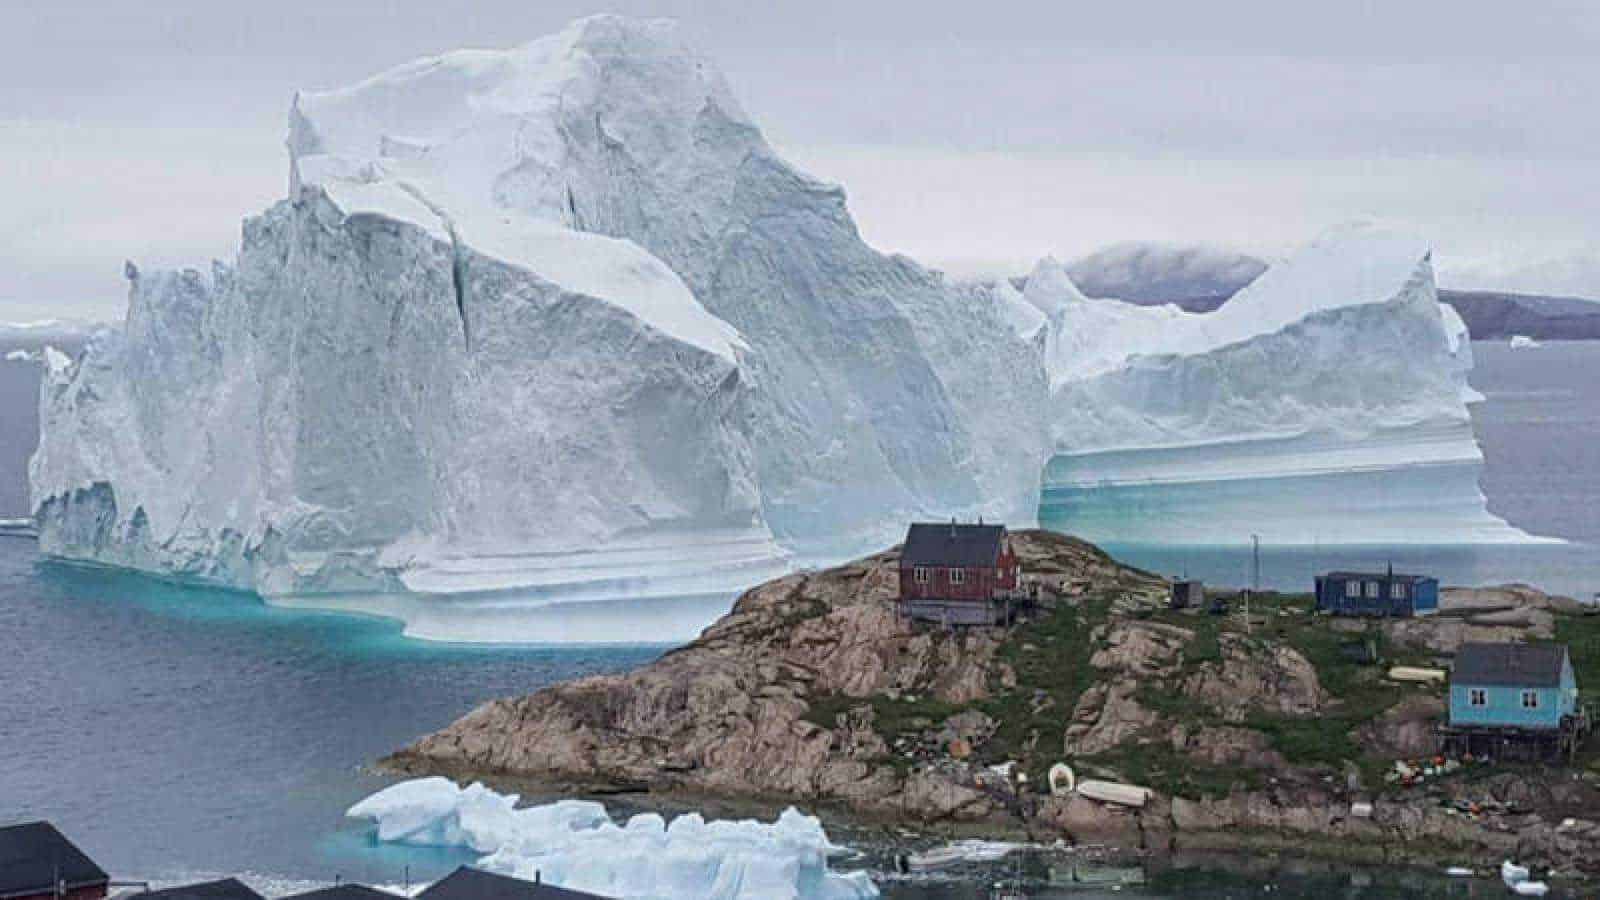 Greenland lost 600 billion tons of ice last summer, satellite data shows - ZME Science